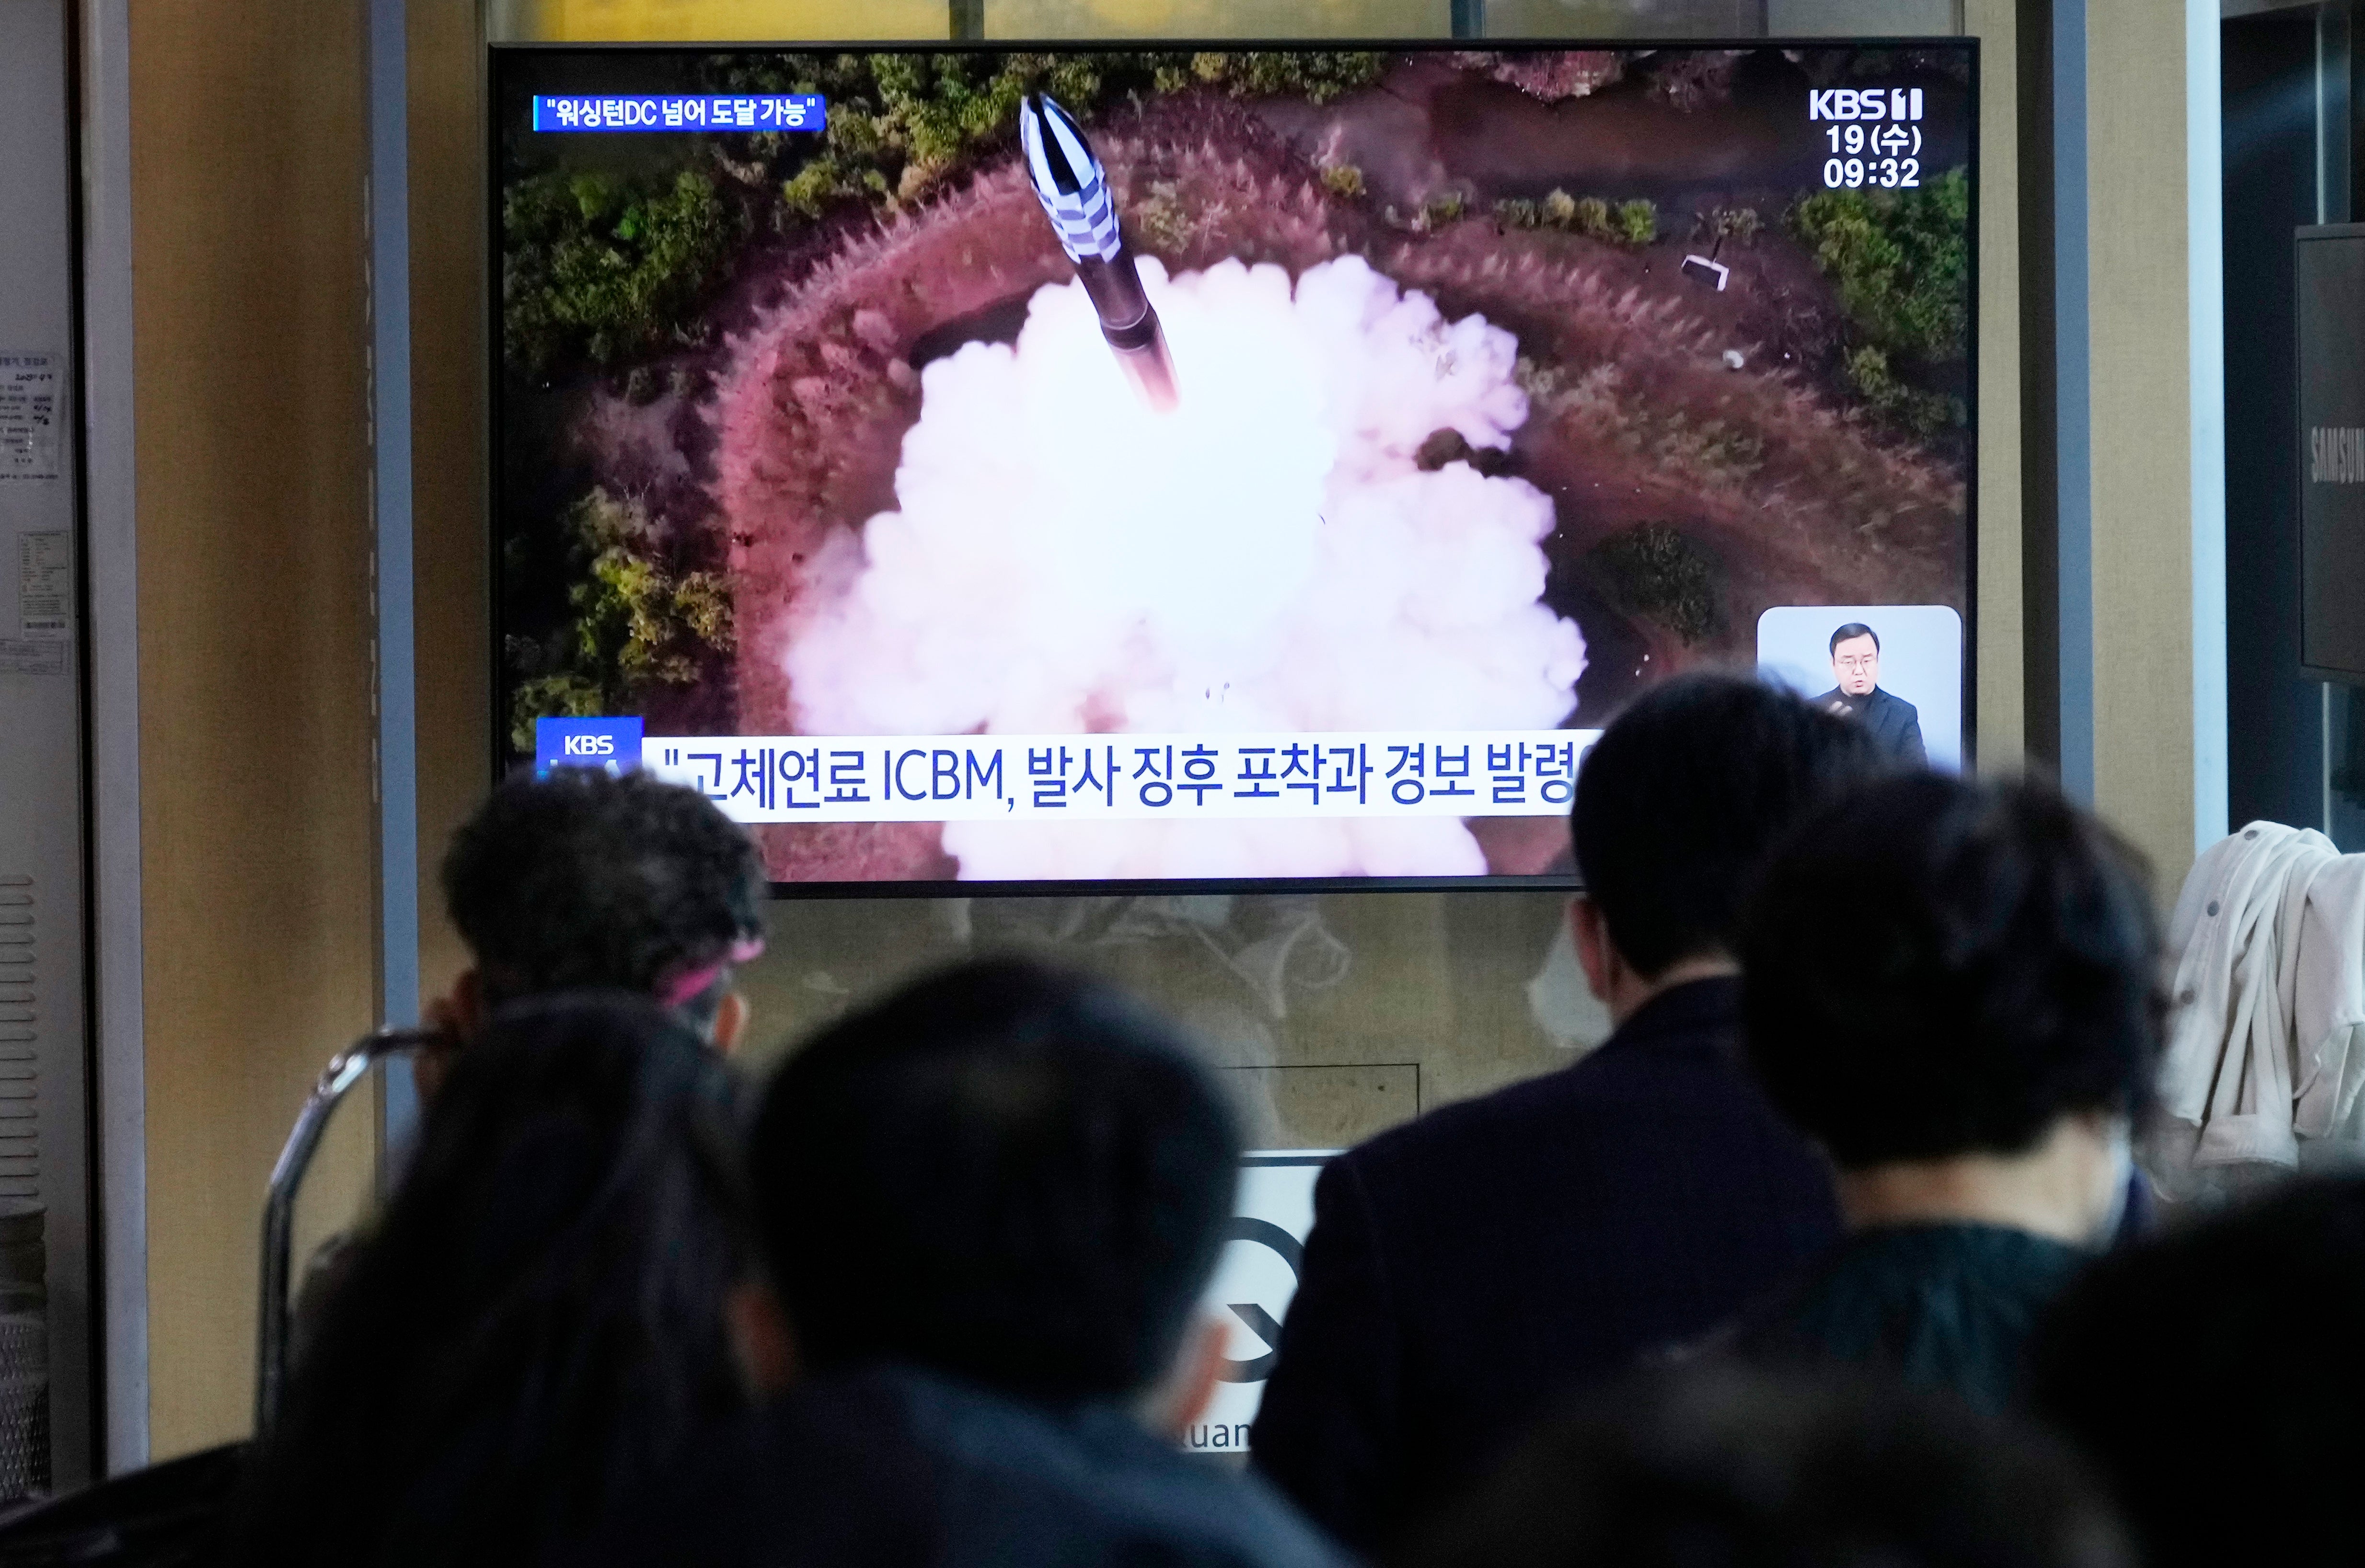 A TV screen shows a file image of North Korea's missile launch during a news program at the Seoul Railway Station in Seoul, South Korea, Wednesday, 19 April 2023